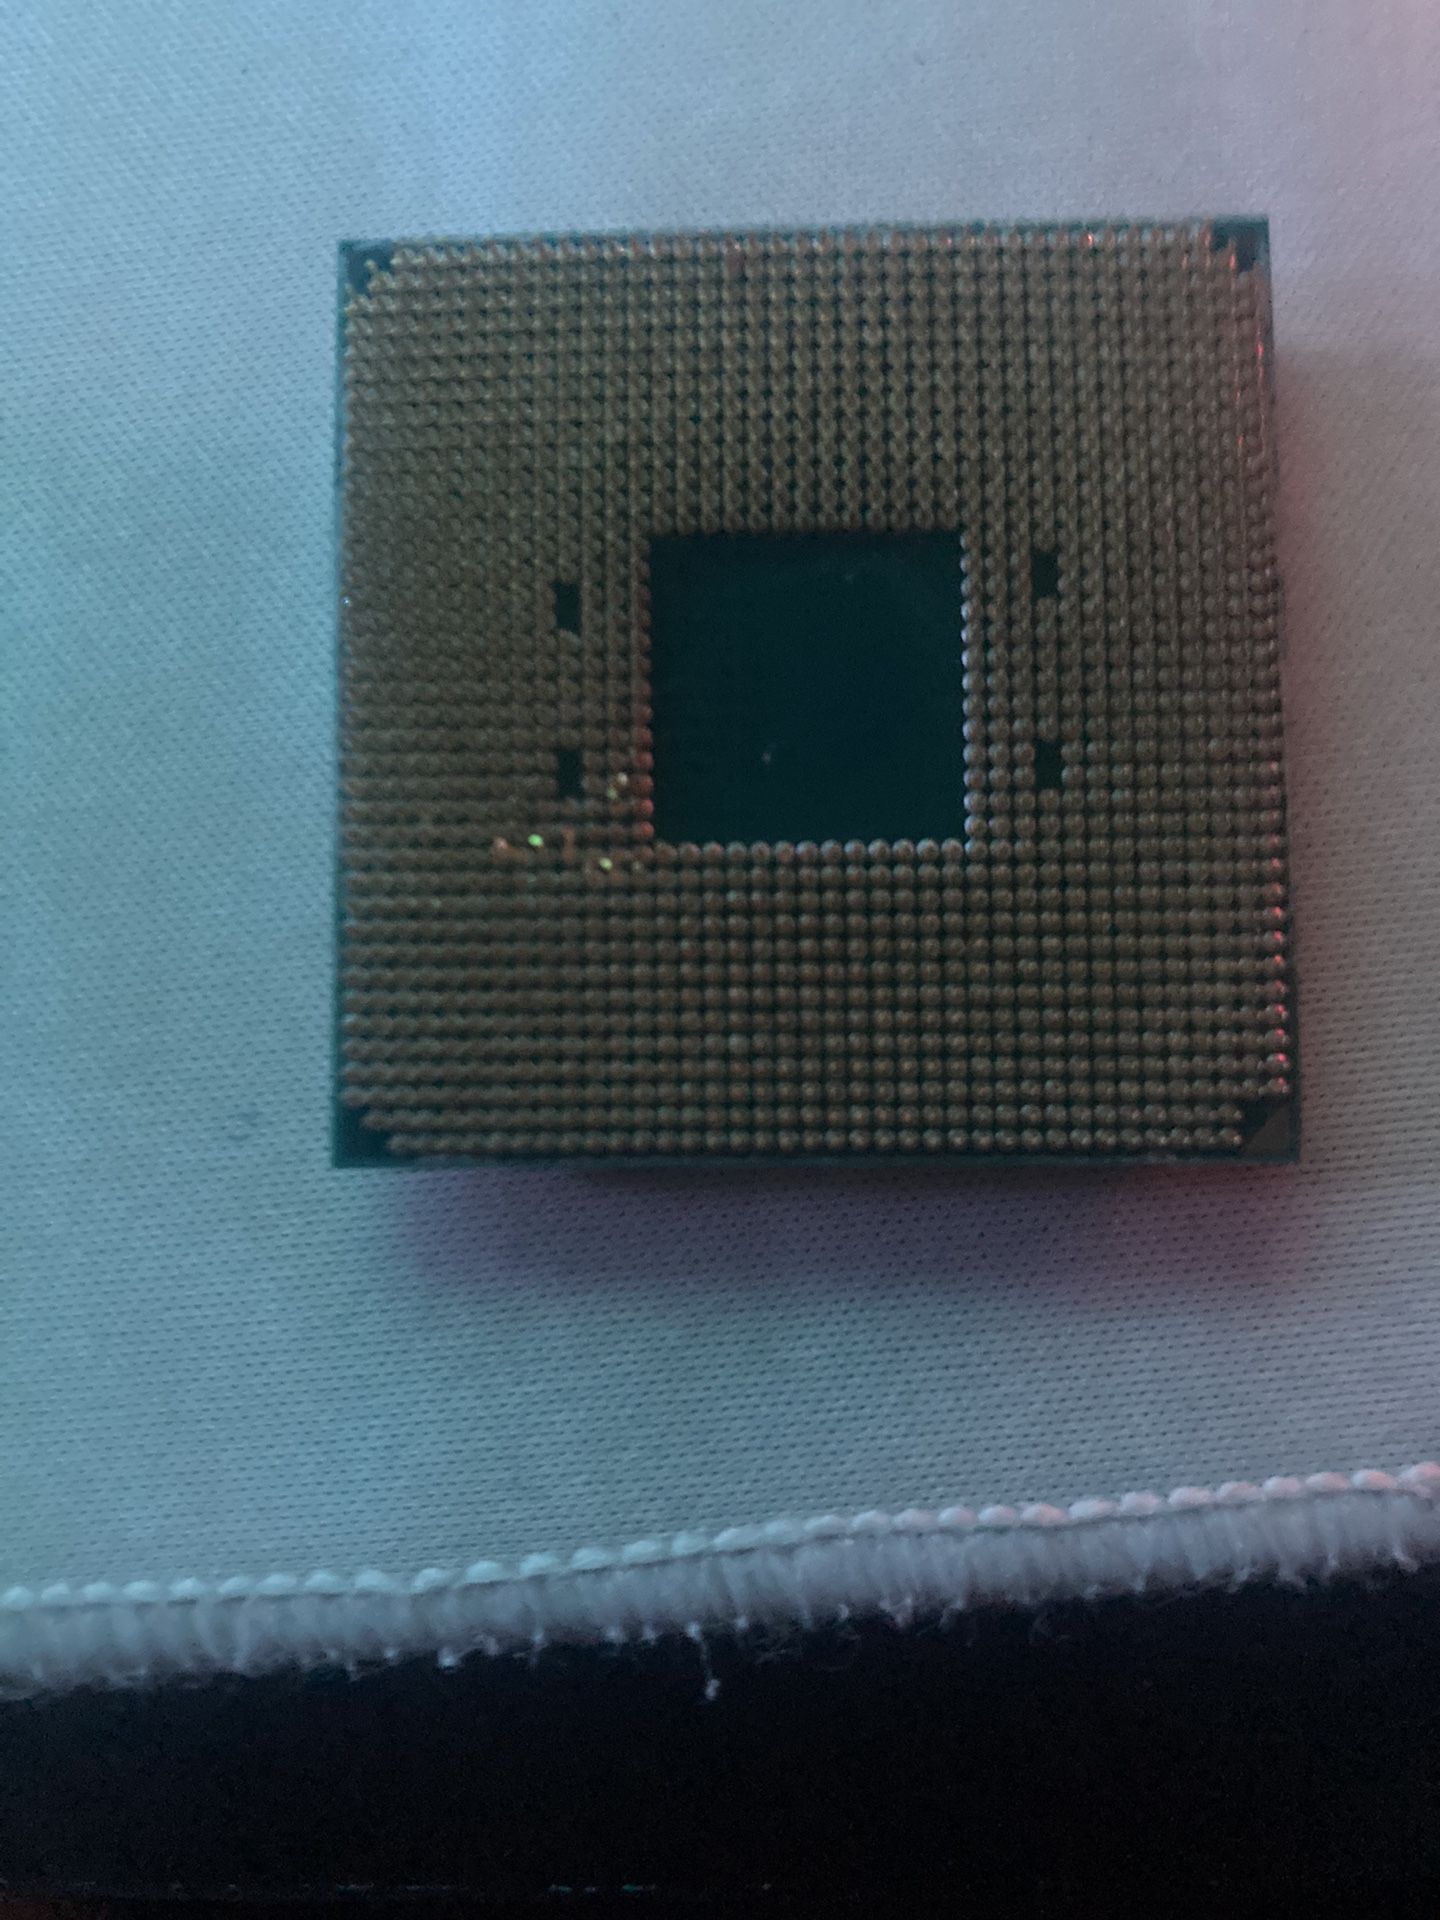 Can Somebody Fix My CPU Pins I Will Pay